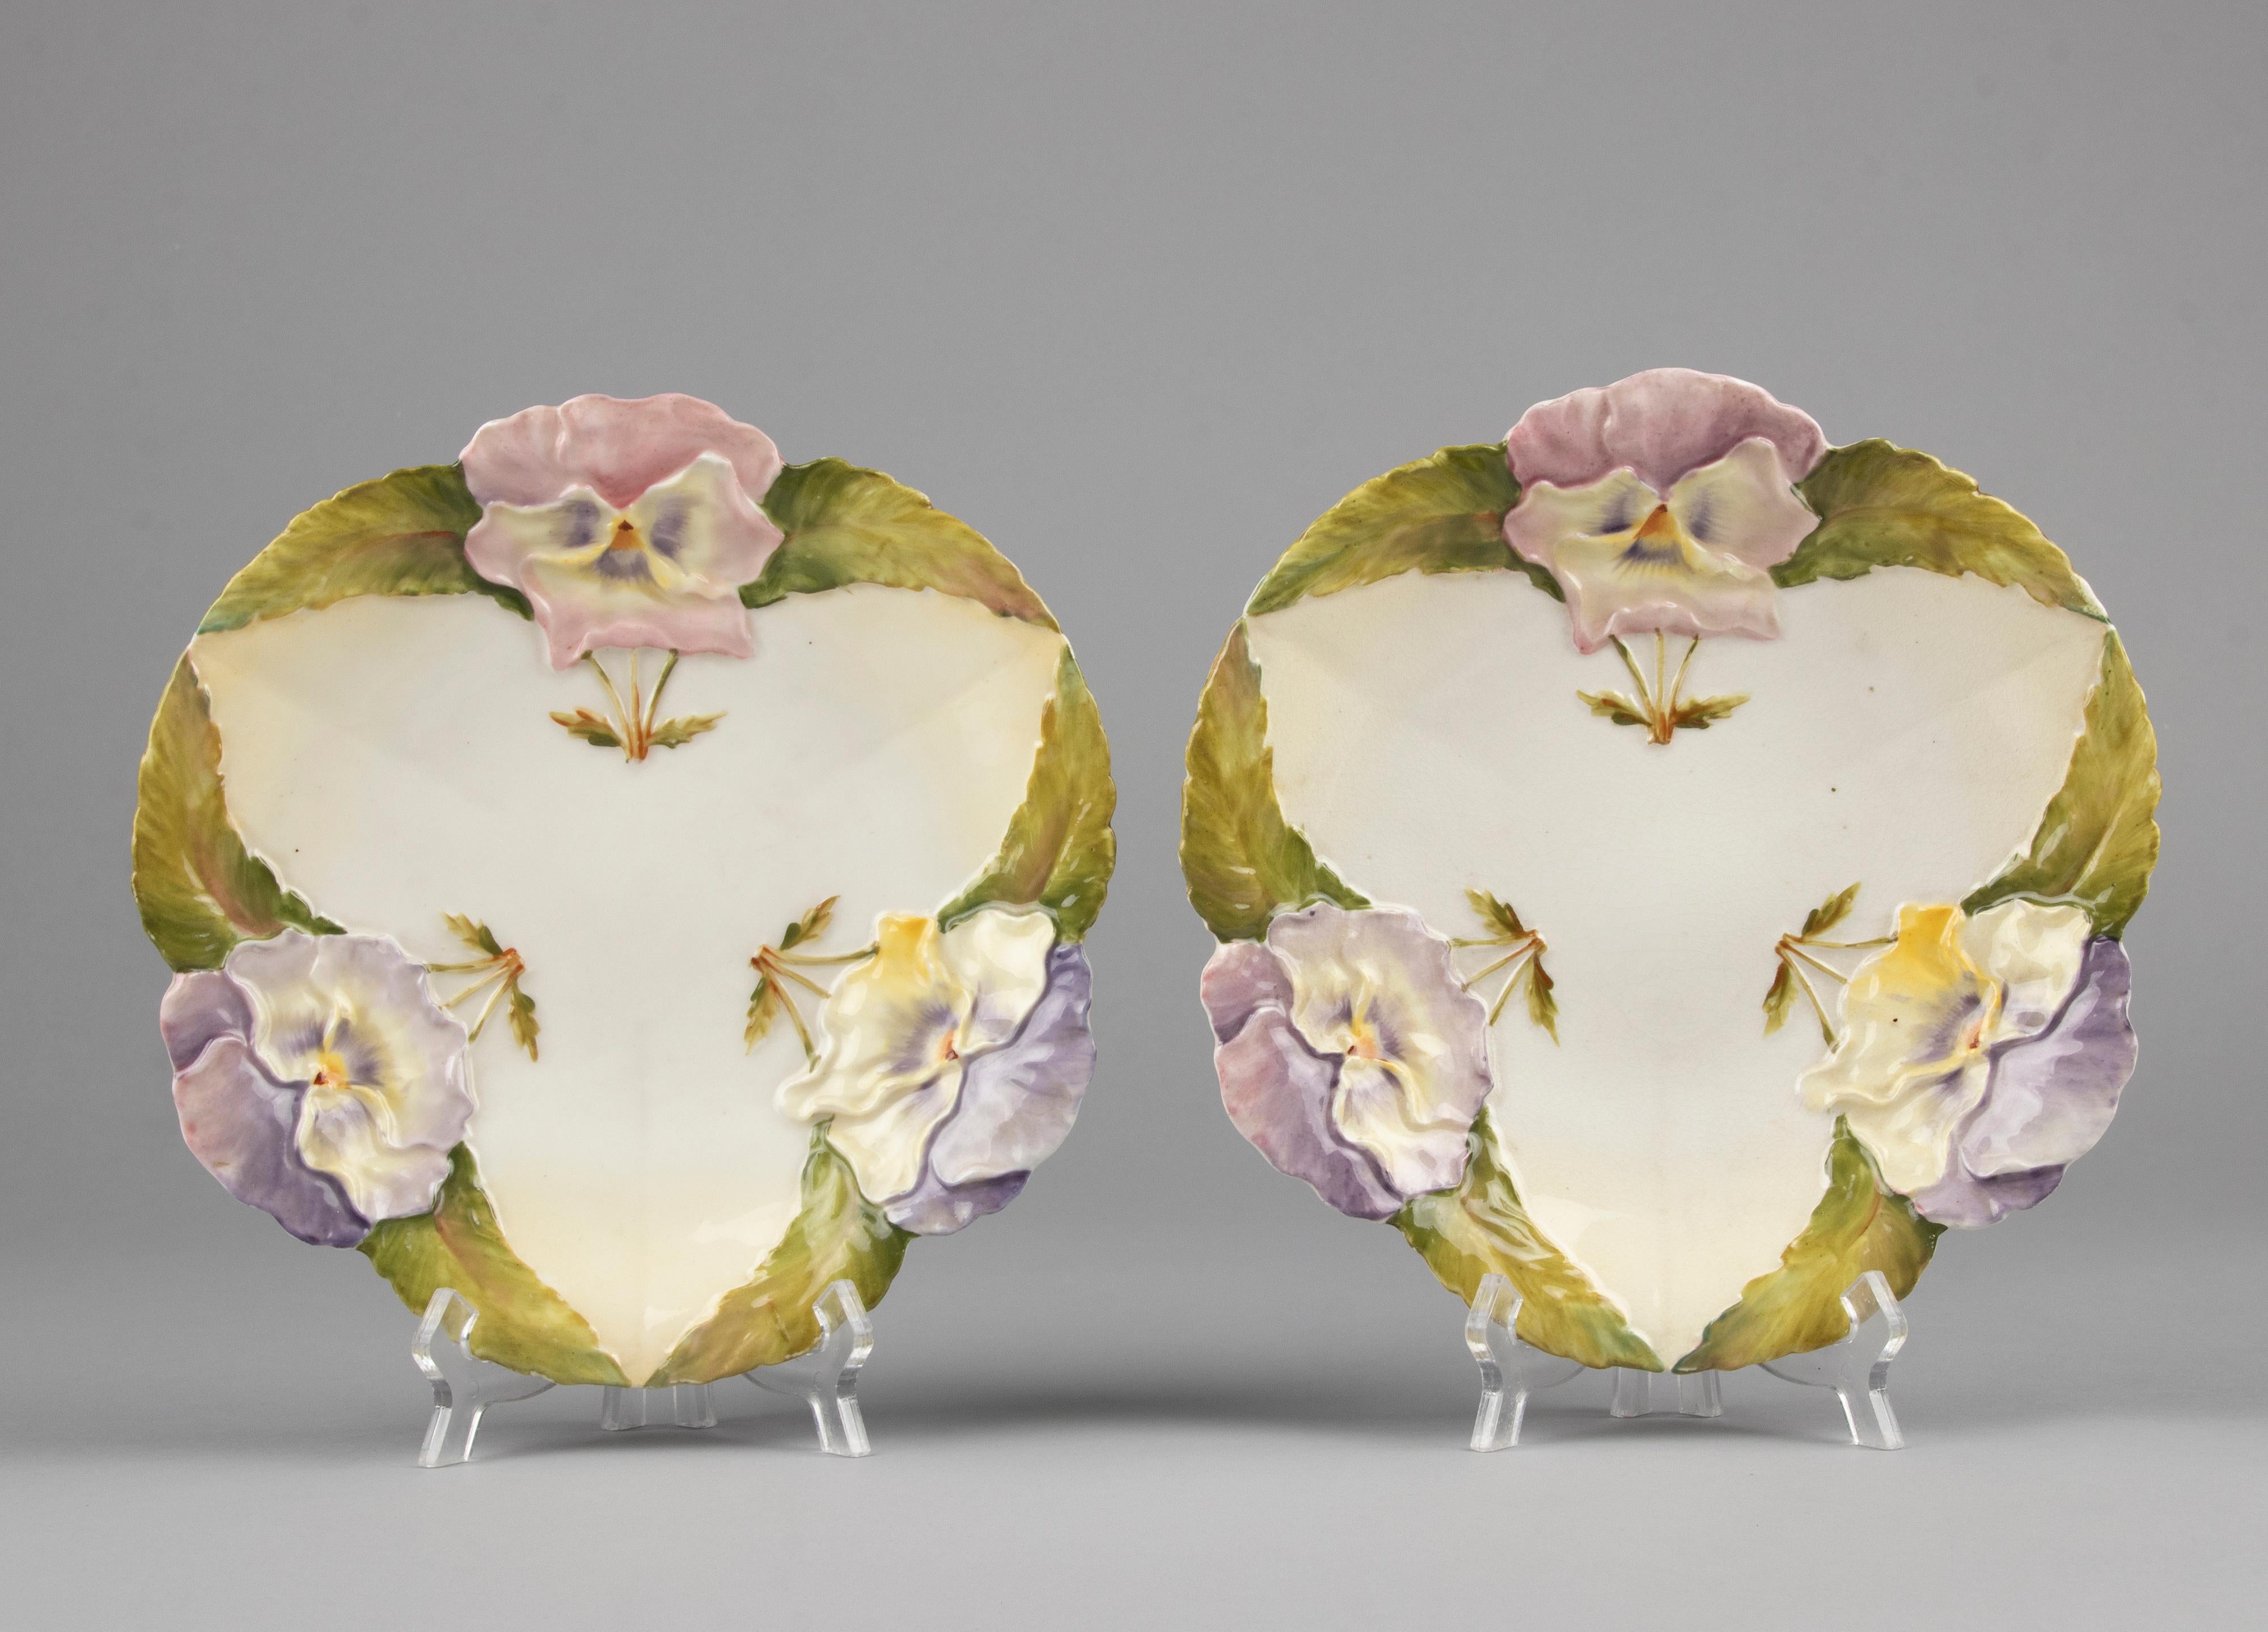 A lovely pair of 19th century Majolica plates. With great shape and striking colors. 
The plates are marked on the back with a blind mark, but this is not legible. 
The plates are in good condition. No chips and nog hairlines.
  